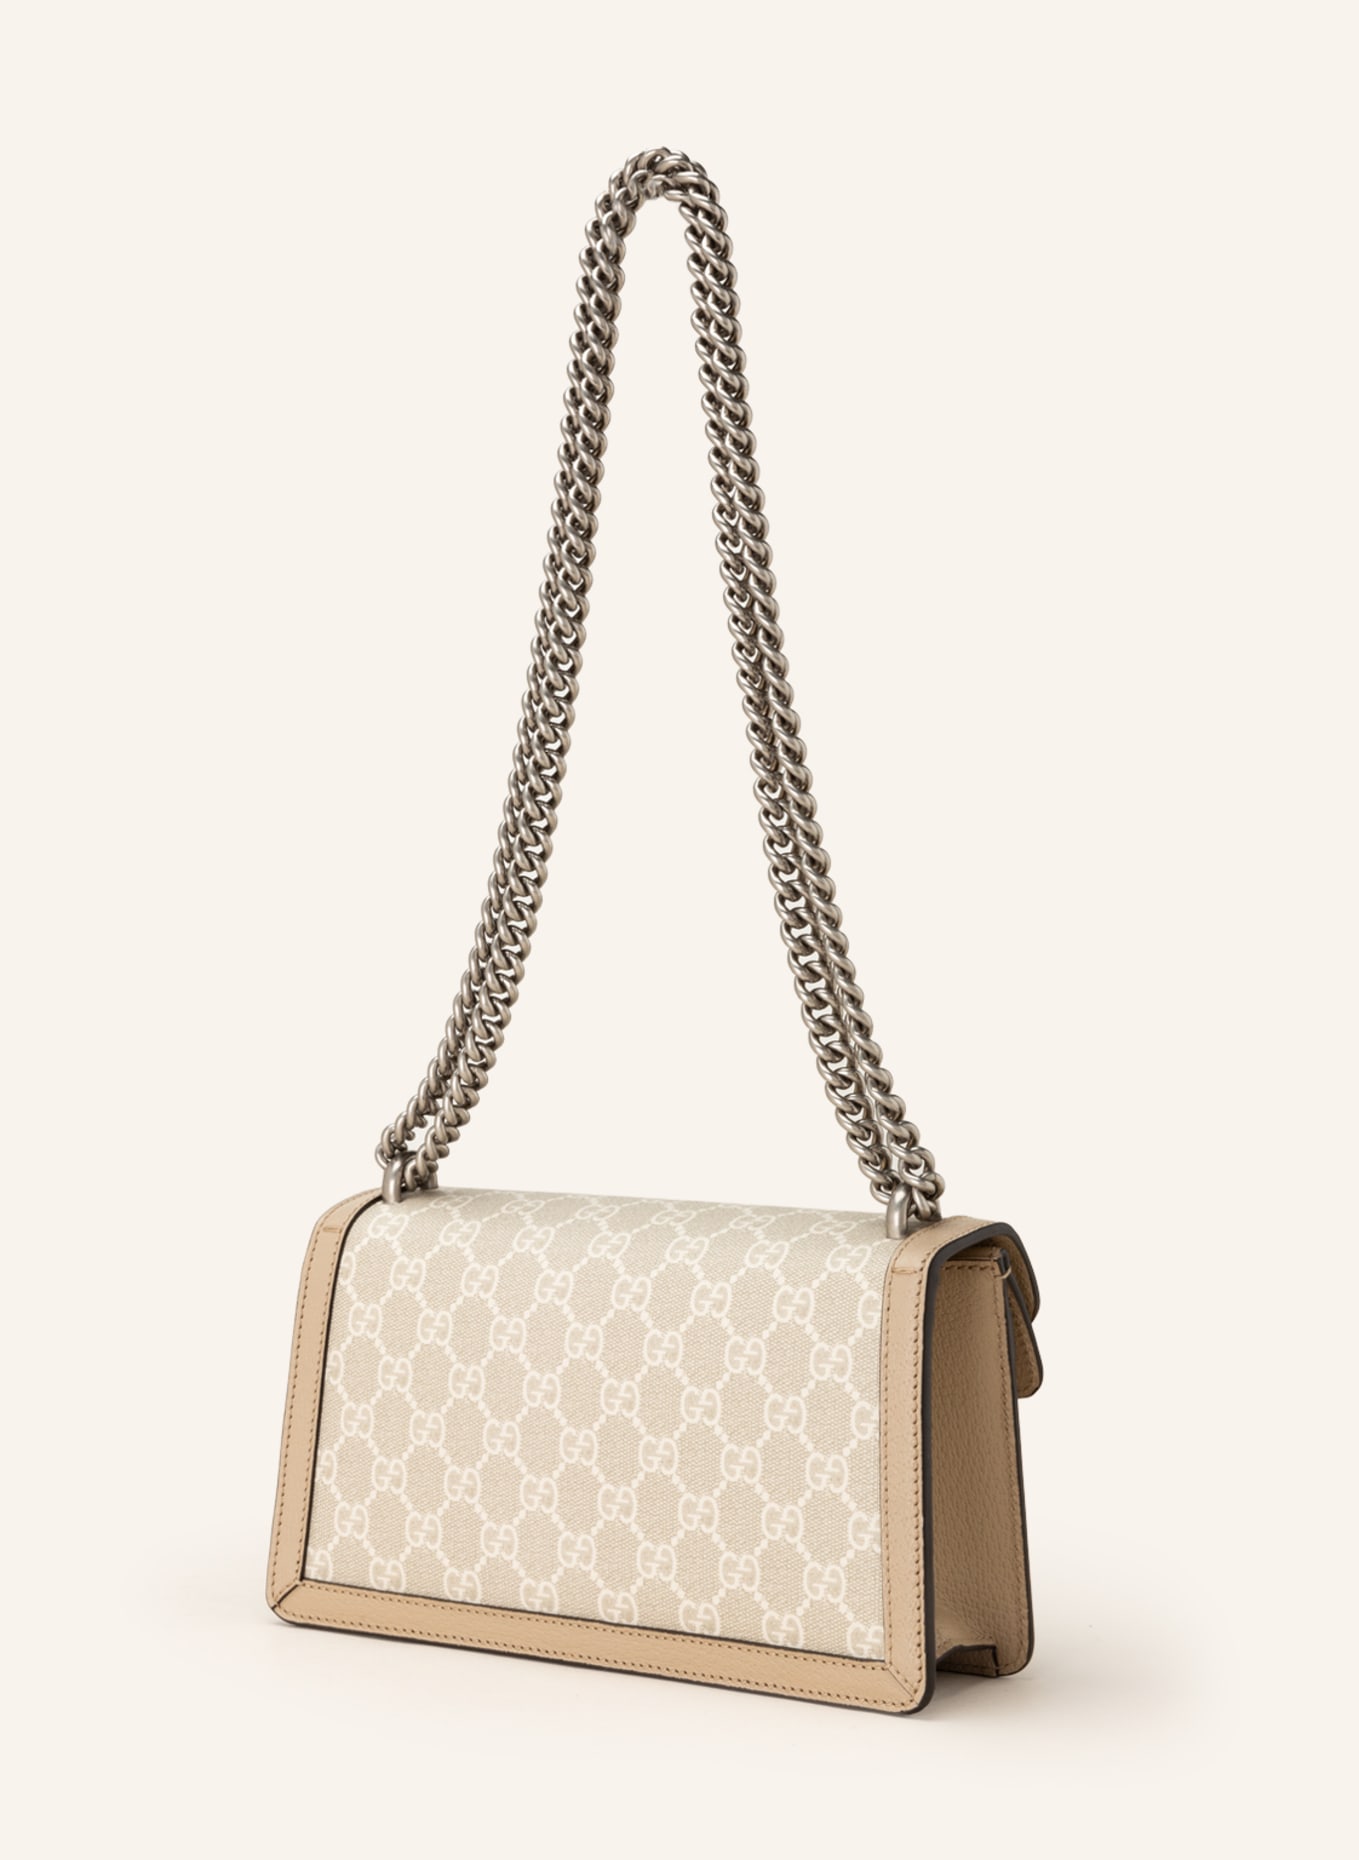 GG Marmont mini chain bag in oatmeal leather